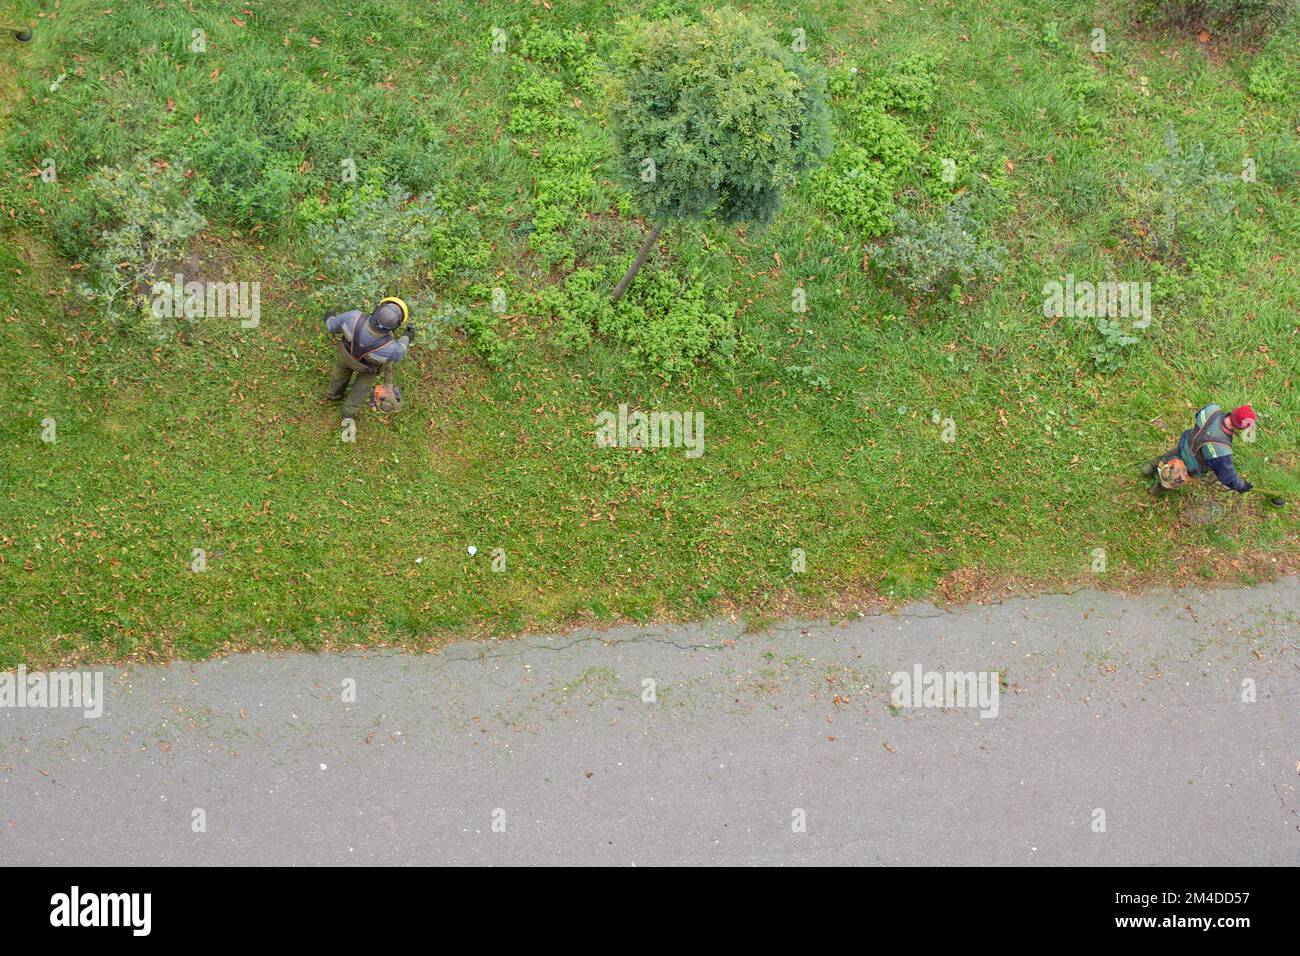 workers mow the grass with a gasoline brushcutter in the city, top view Stock Photo